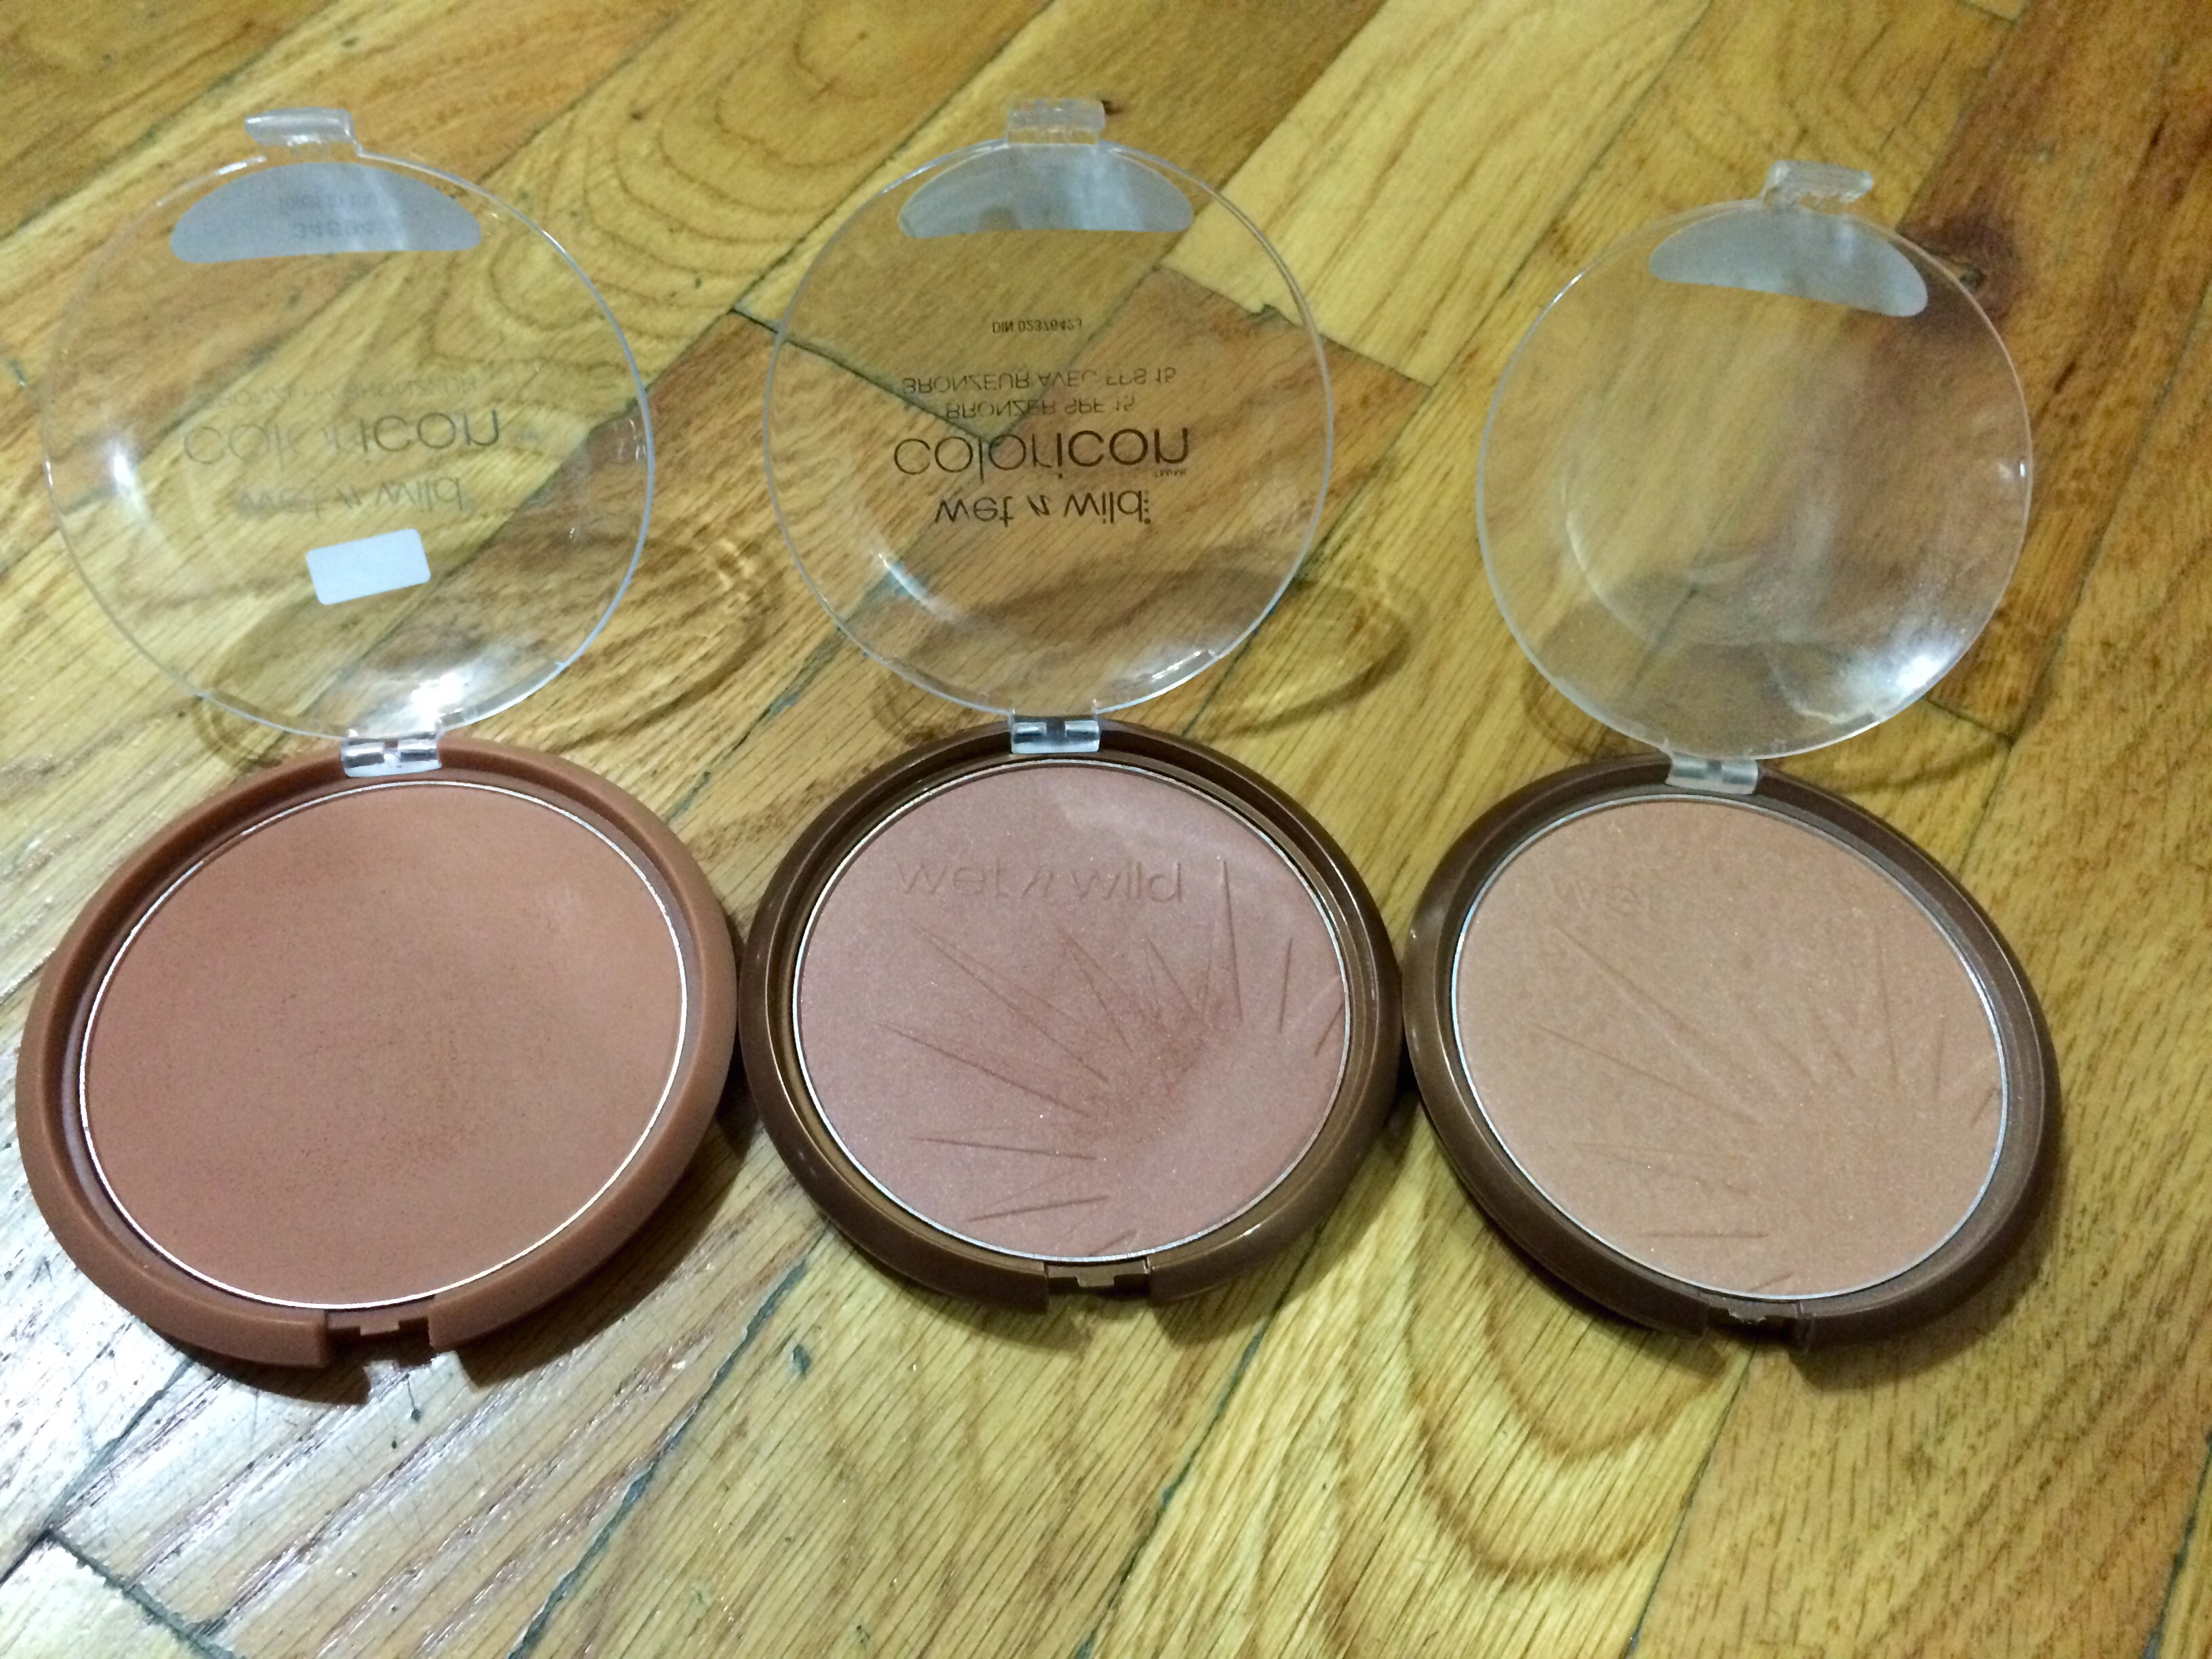 Here are the actual bronzer shades. 